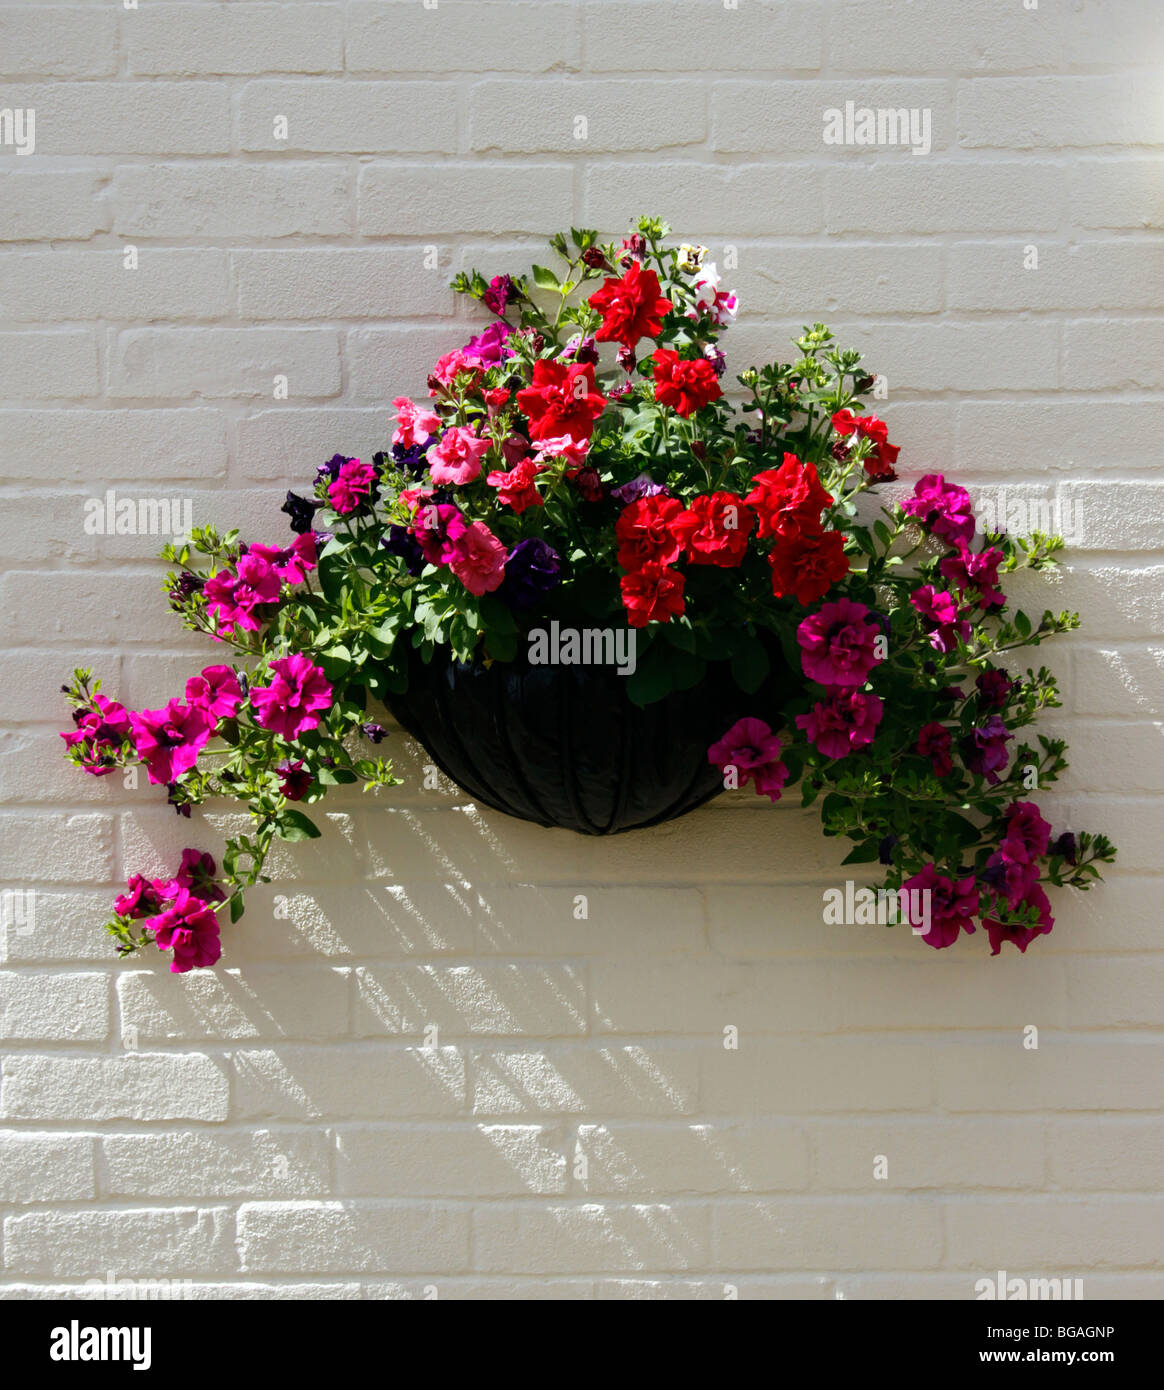 TRAILING PETUNIAS GROWING IN A WALL BASKET. Stock Photo